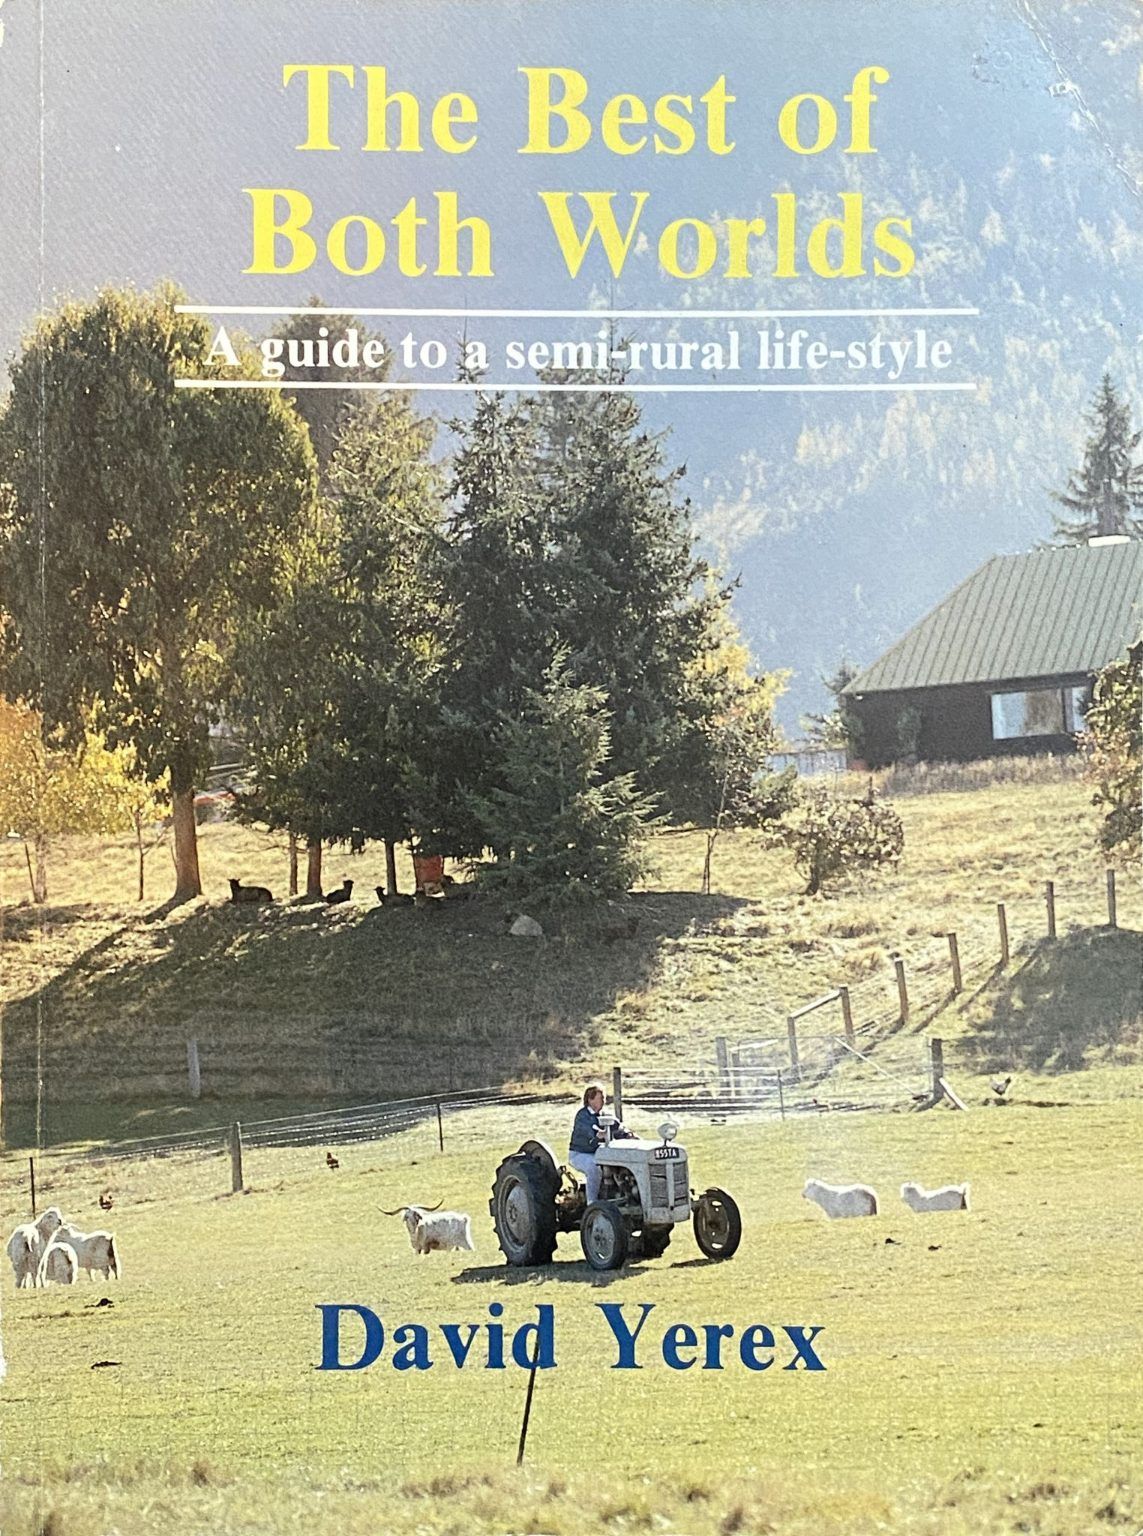 THE BEST OF BOTH WORLDS: A Guide to a semi-rural life-style